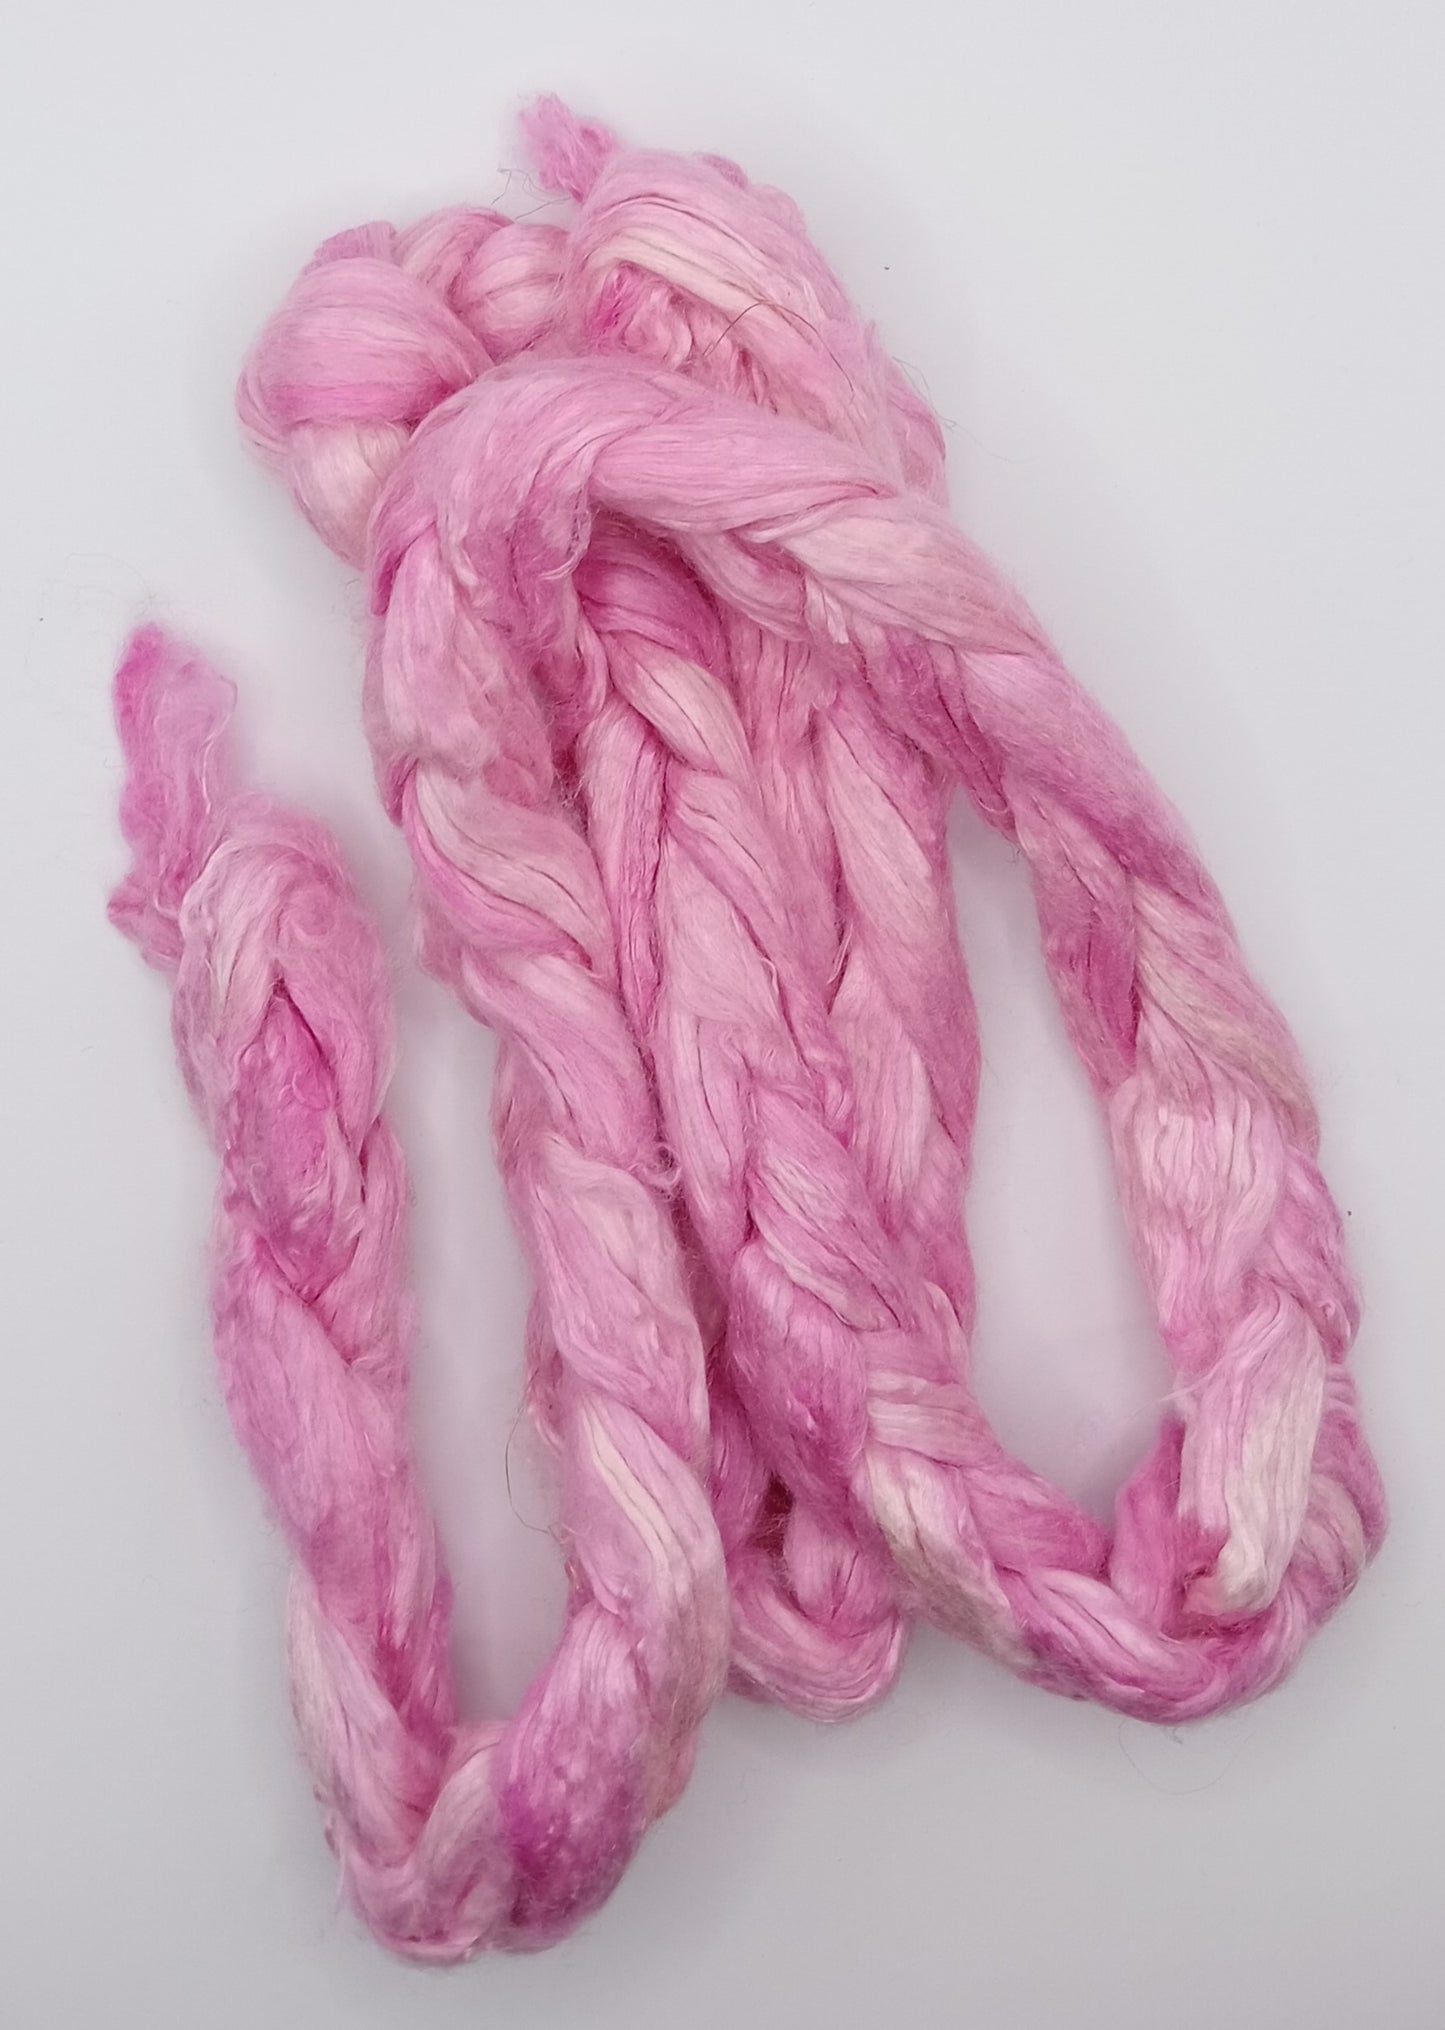 50G 'A' Grade Pure Mulberry Silk- "Pinks" Hand Dyed Luxury